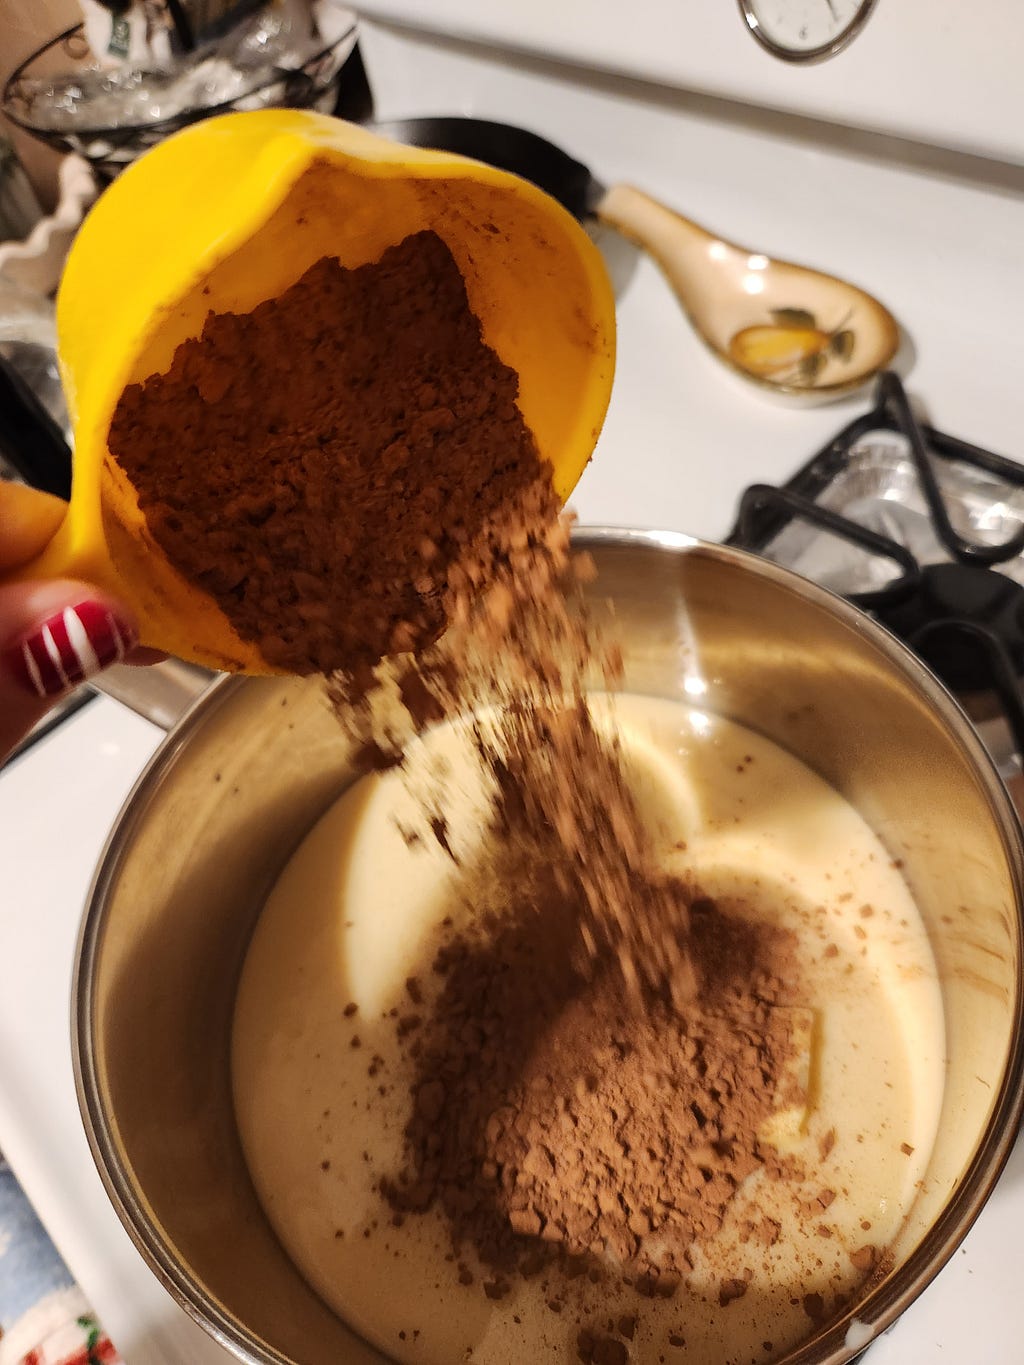 A photo of my hand (thumb visible) pouring in cocoa powder into the condensed milk and butter mixture for brigadeiros. Cocoa powder is falling from a yellow measuring cup into a metal pan on top of a stove.